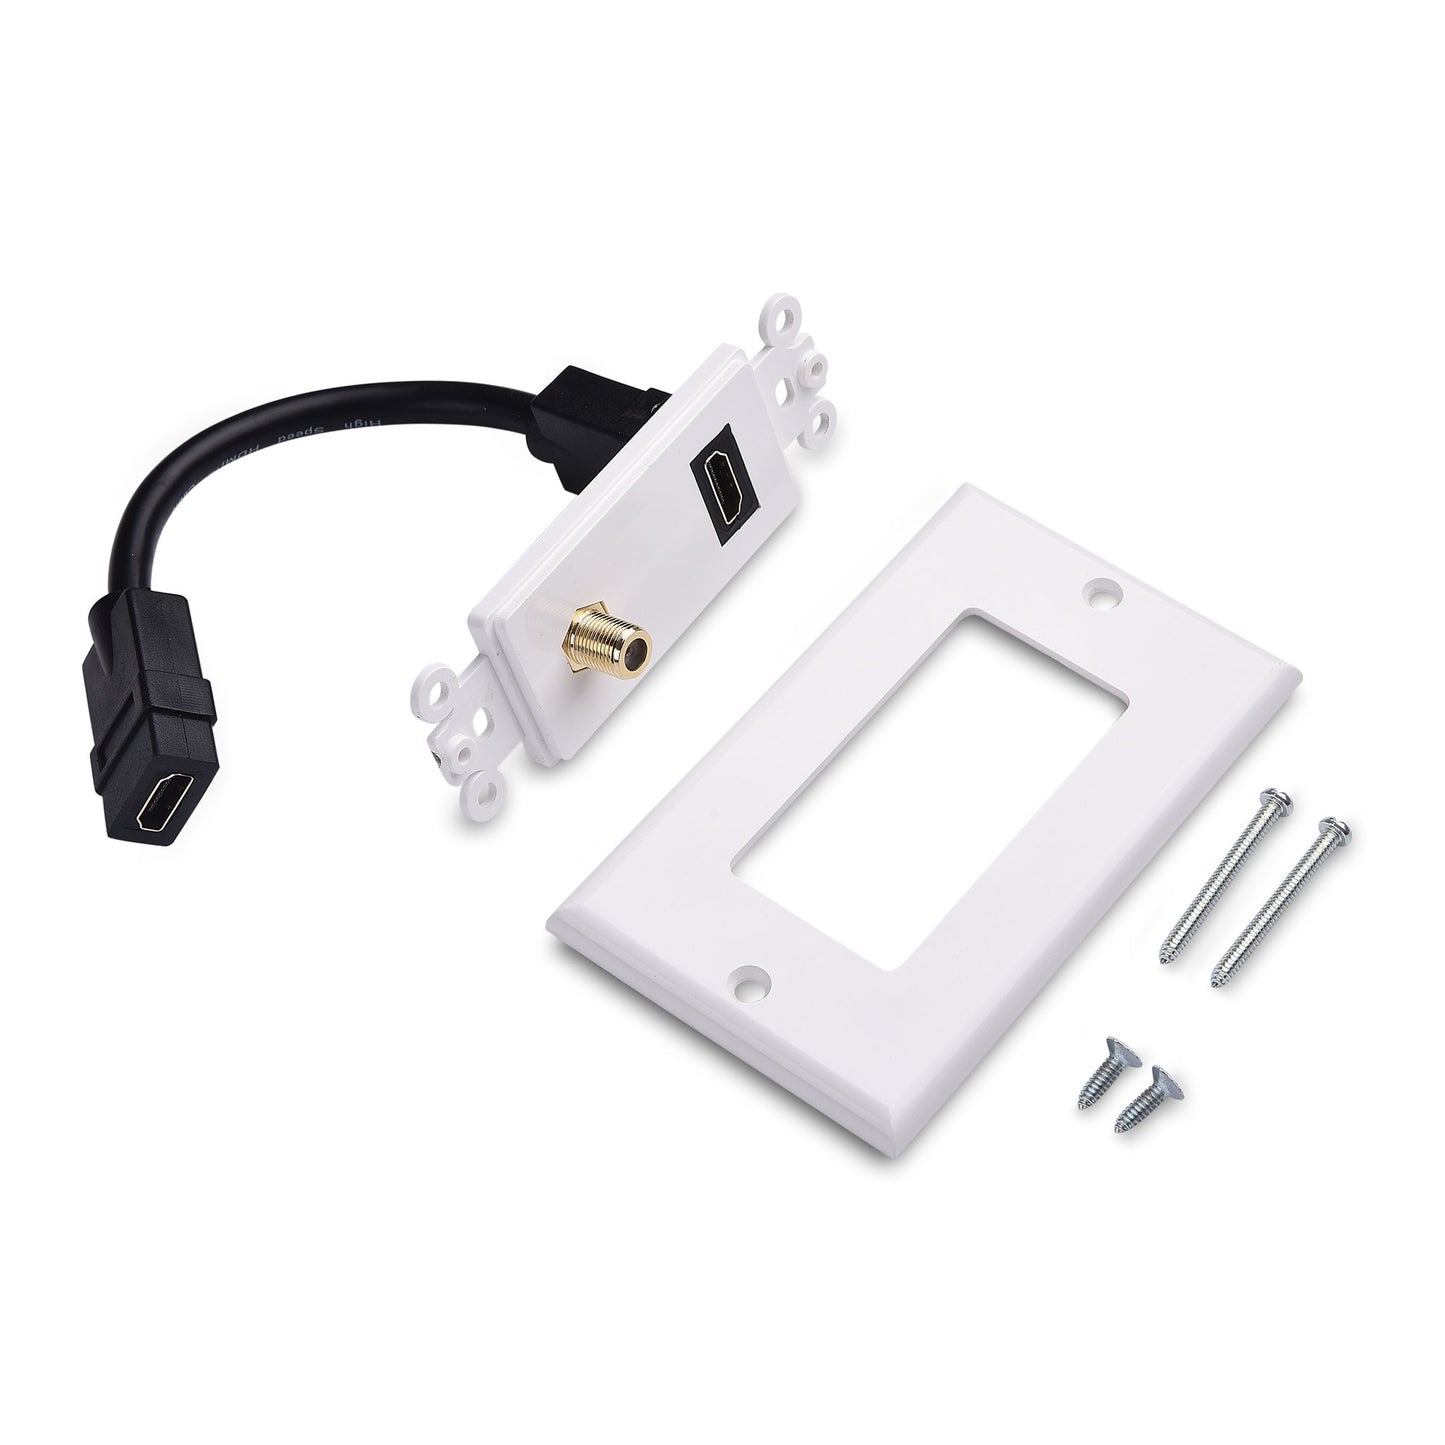 Cable Matters HDMI Wall Plate with Coax Outlet (Coax Wall Plate) in White